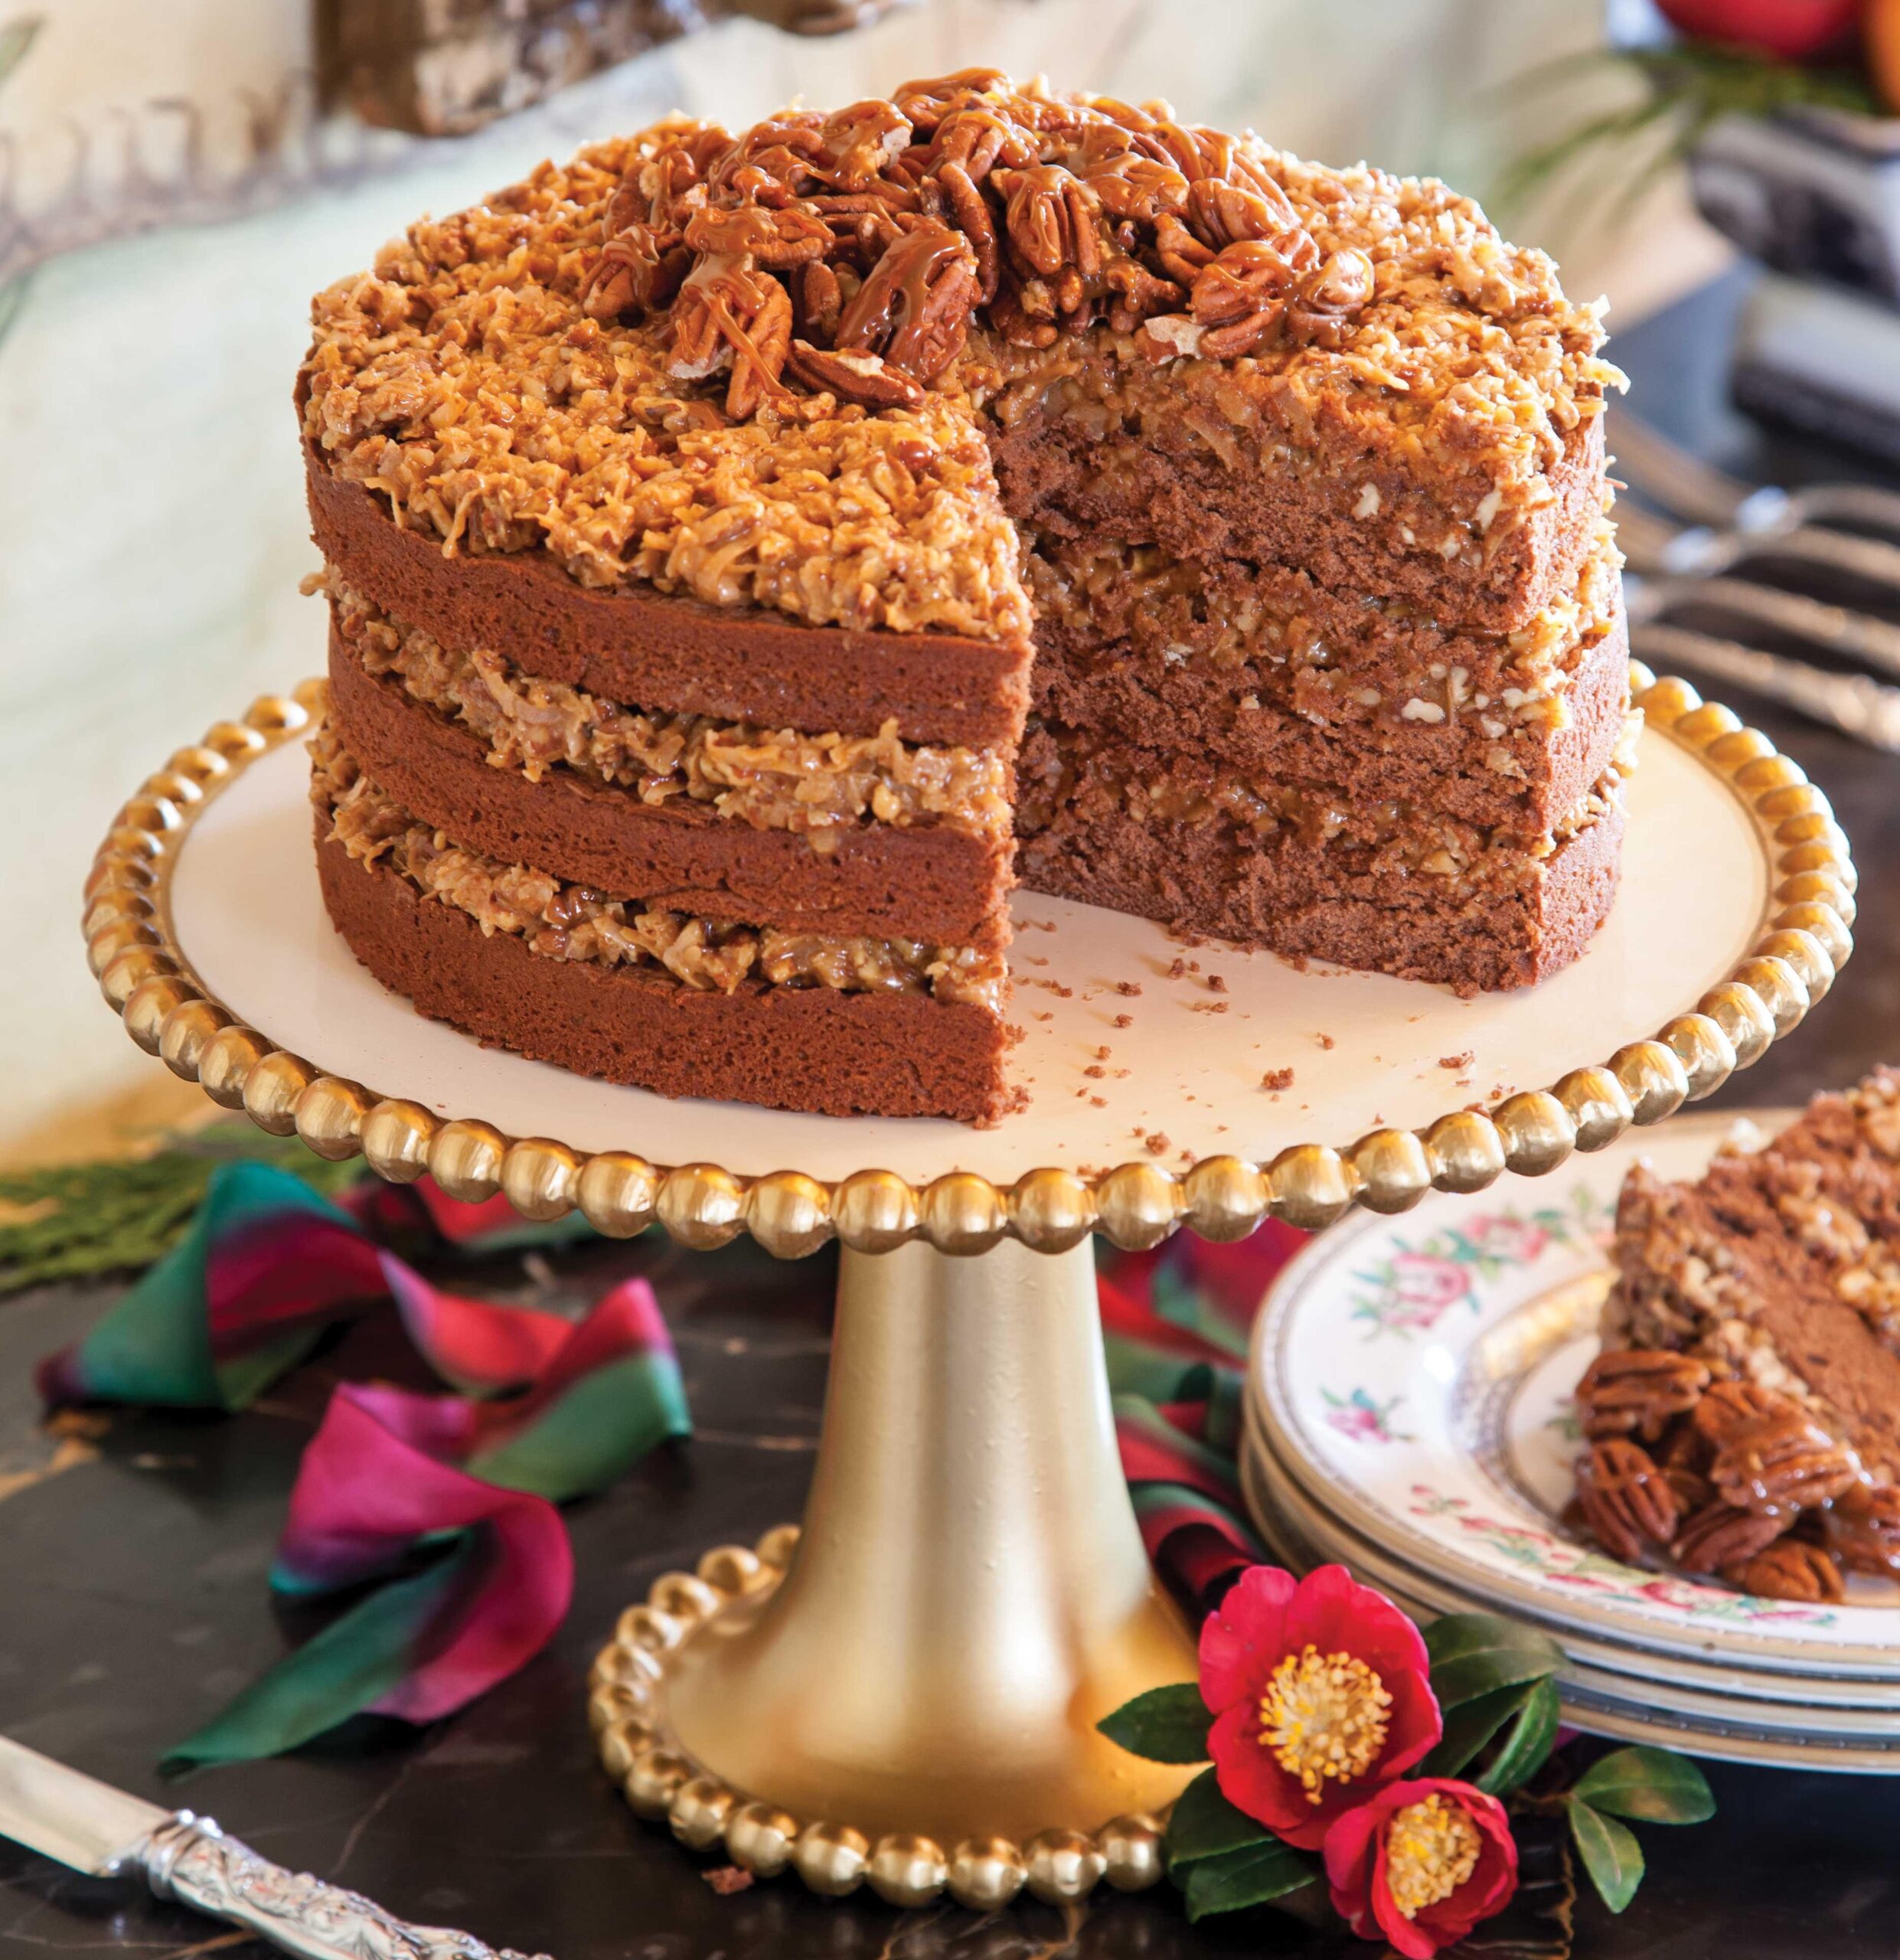  Satisfy your sweet tooth with a luscious Southern Chocolate Cake.